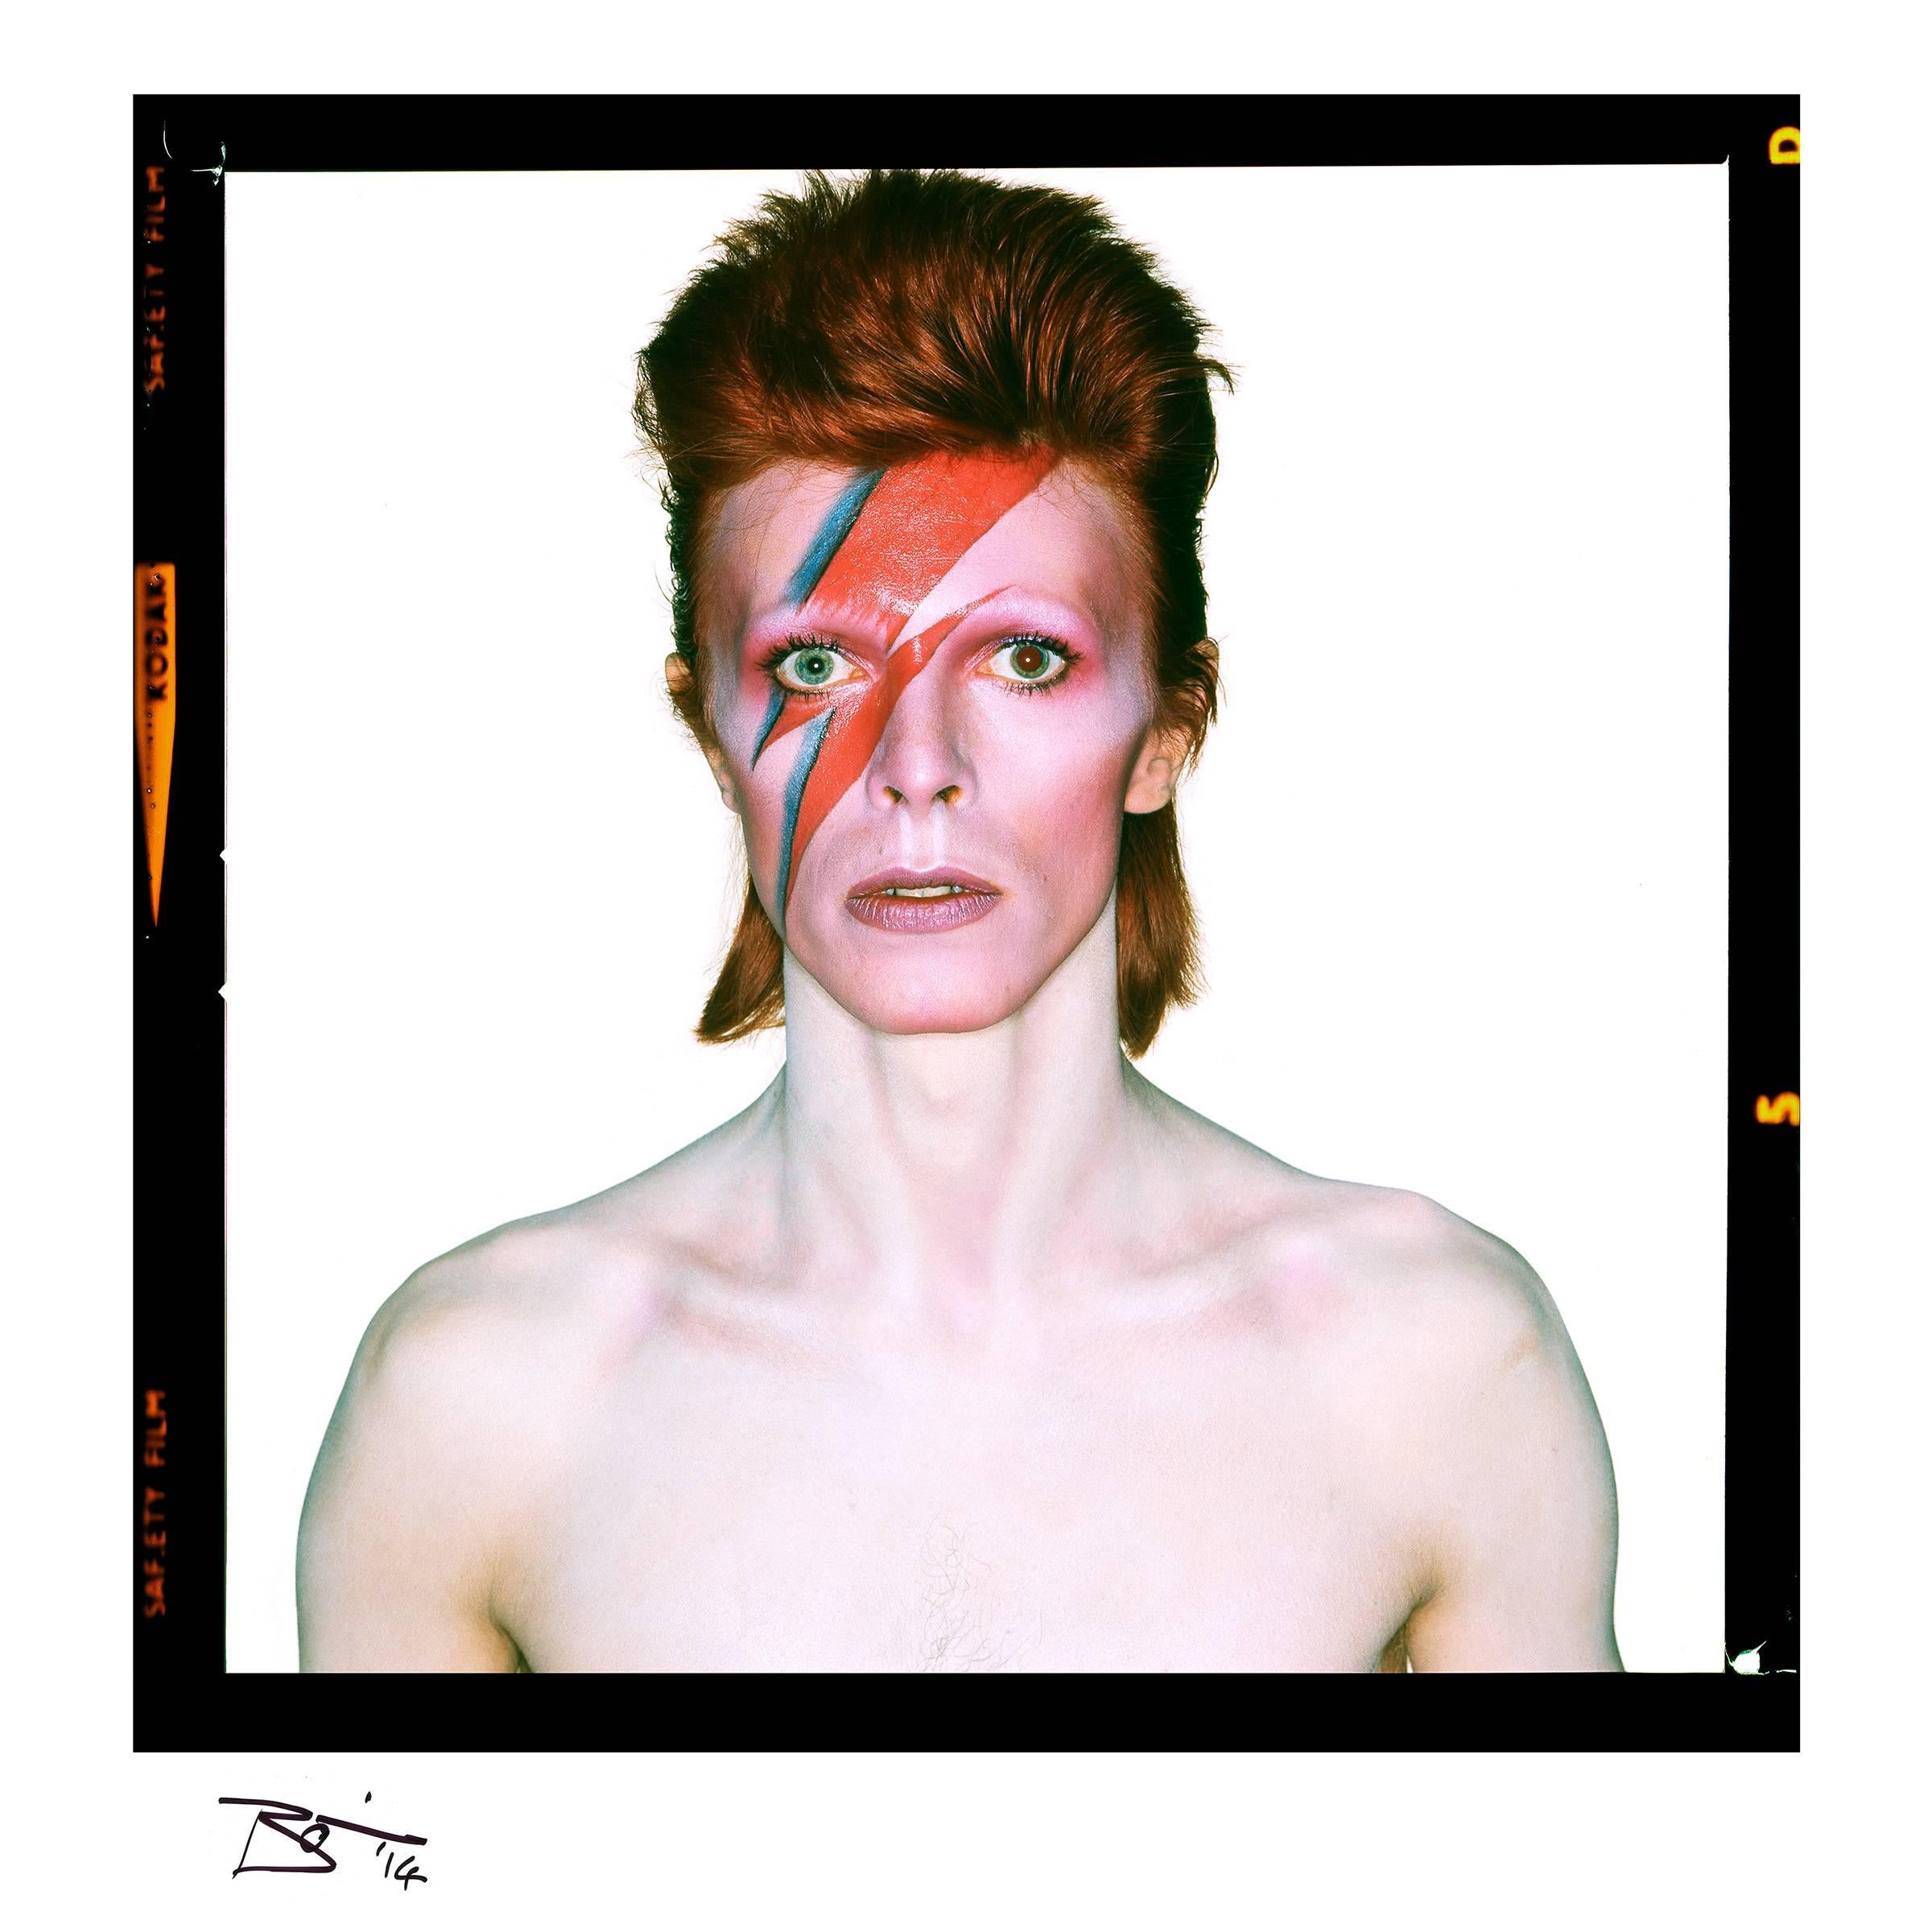 Brian Duffy Color Photograph - Aladdin Sane - Eyes Open 1973 -  Signed by David Bowie